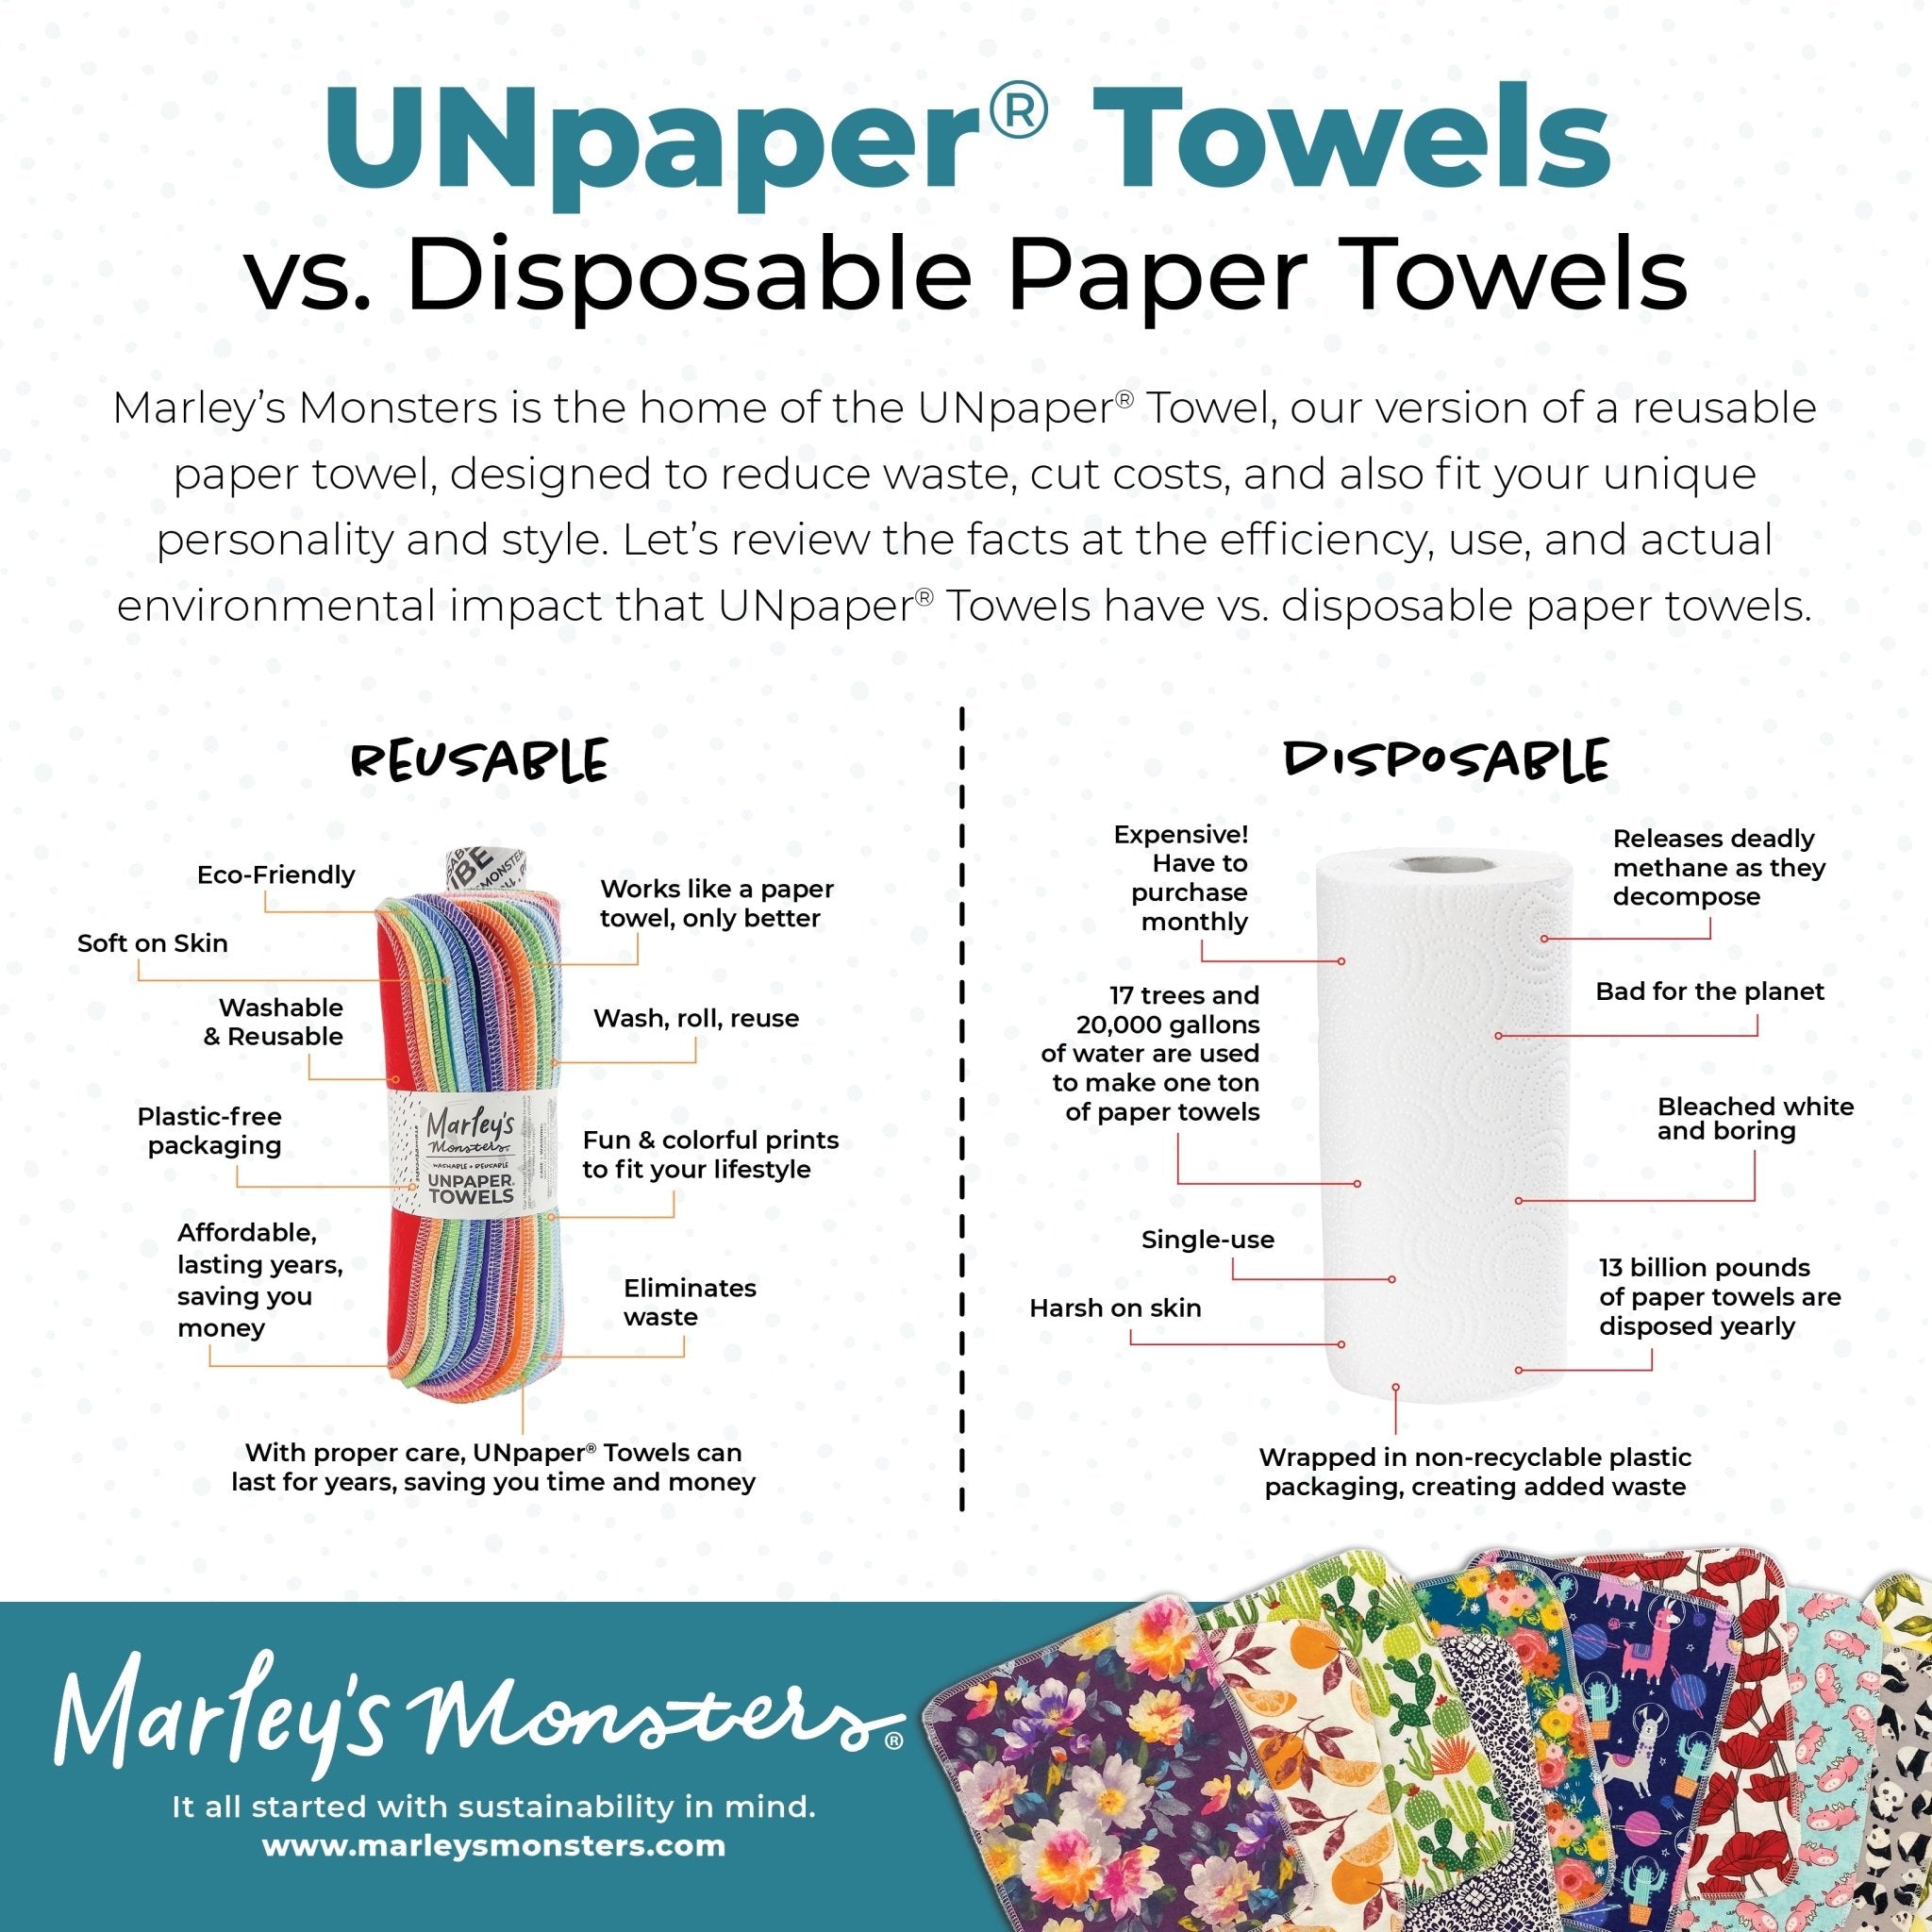 Comparison chart for UNpaper® Towels vs disposable paper towels, showing the benefits of reusing instead of throwing away.